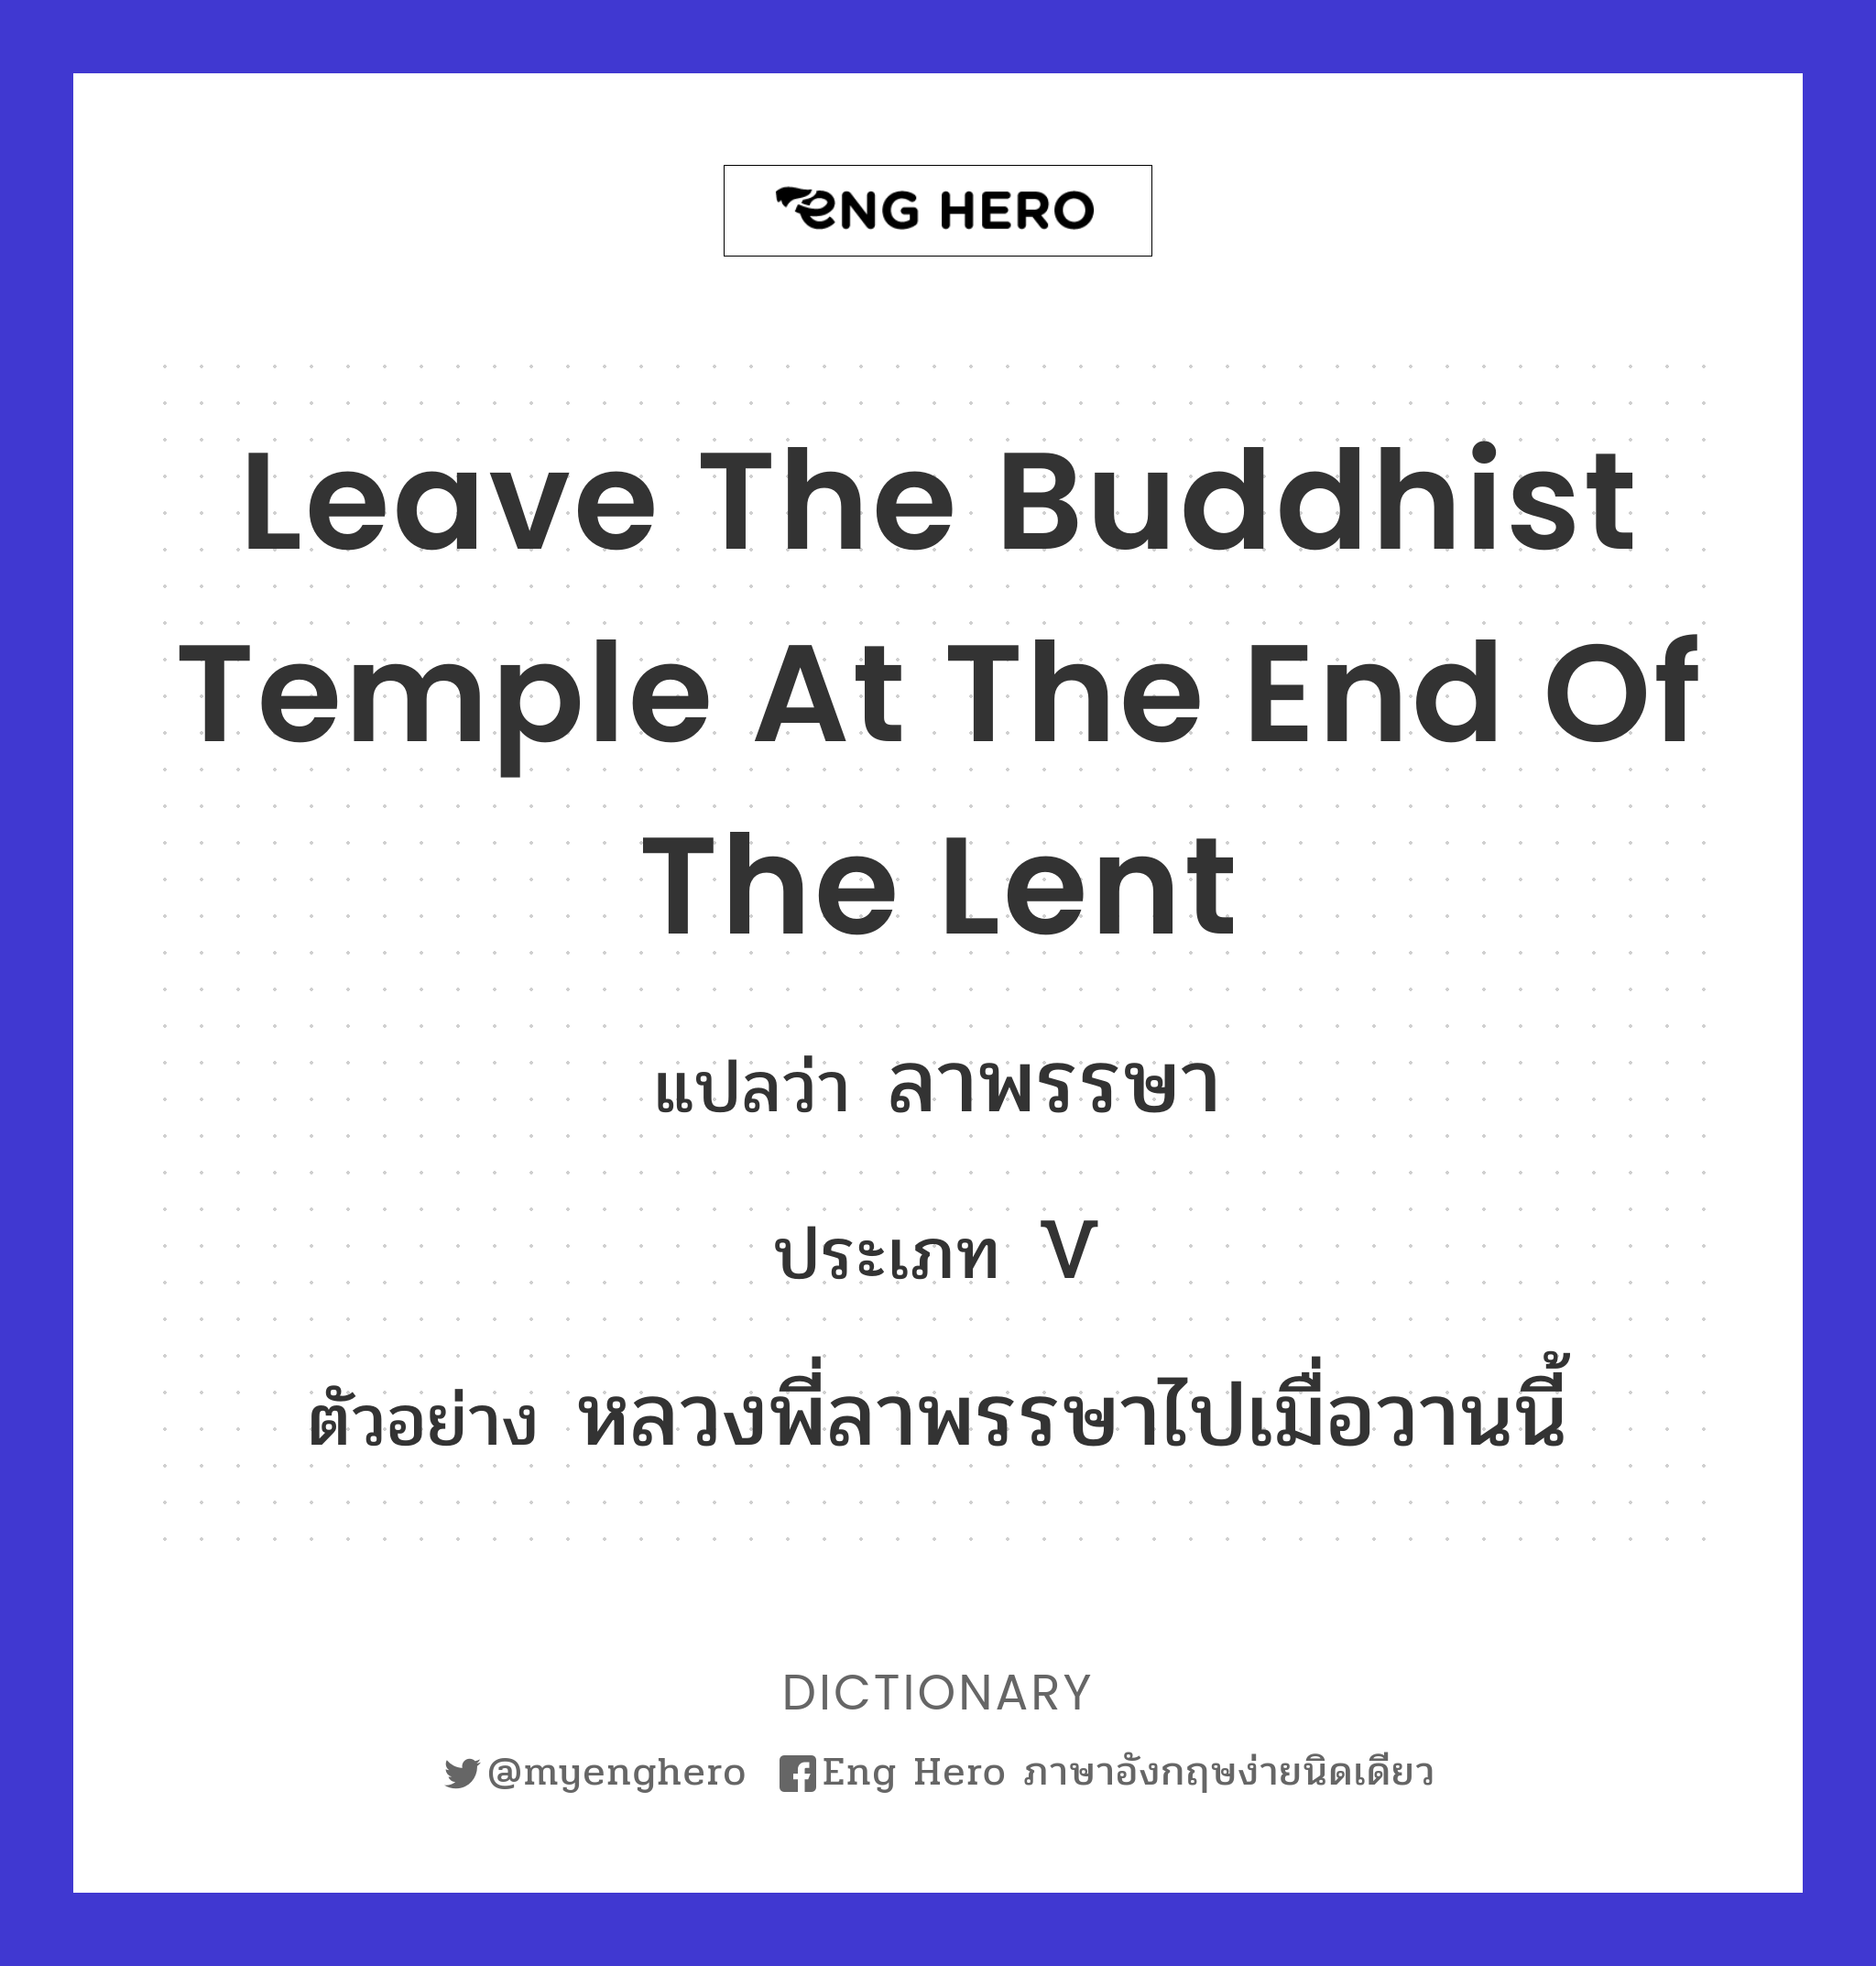 leave the Buddhist temple at the end of the Lent